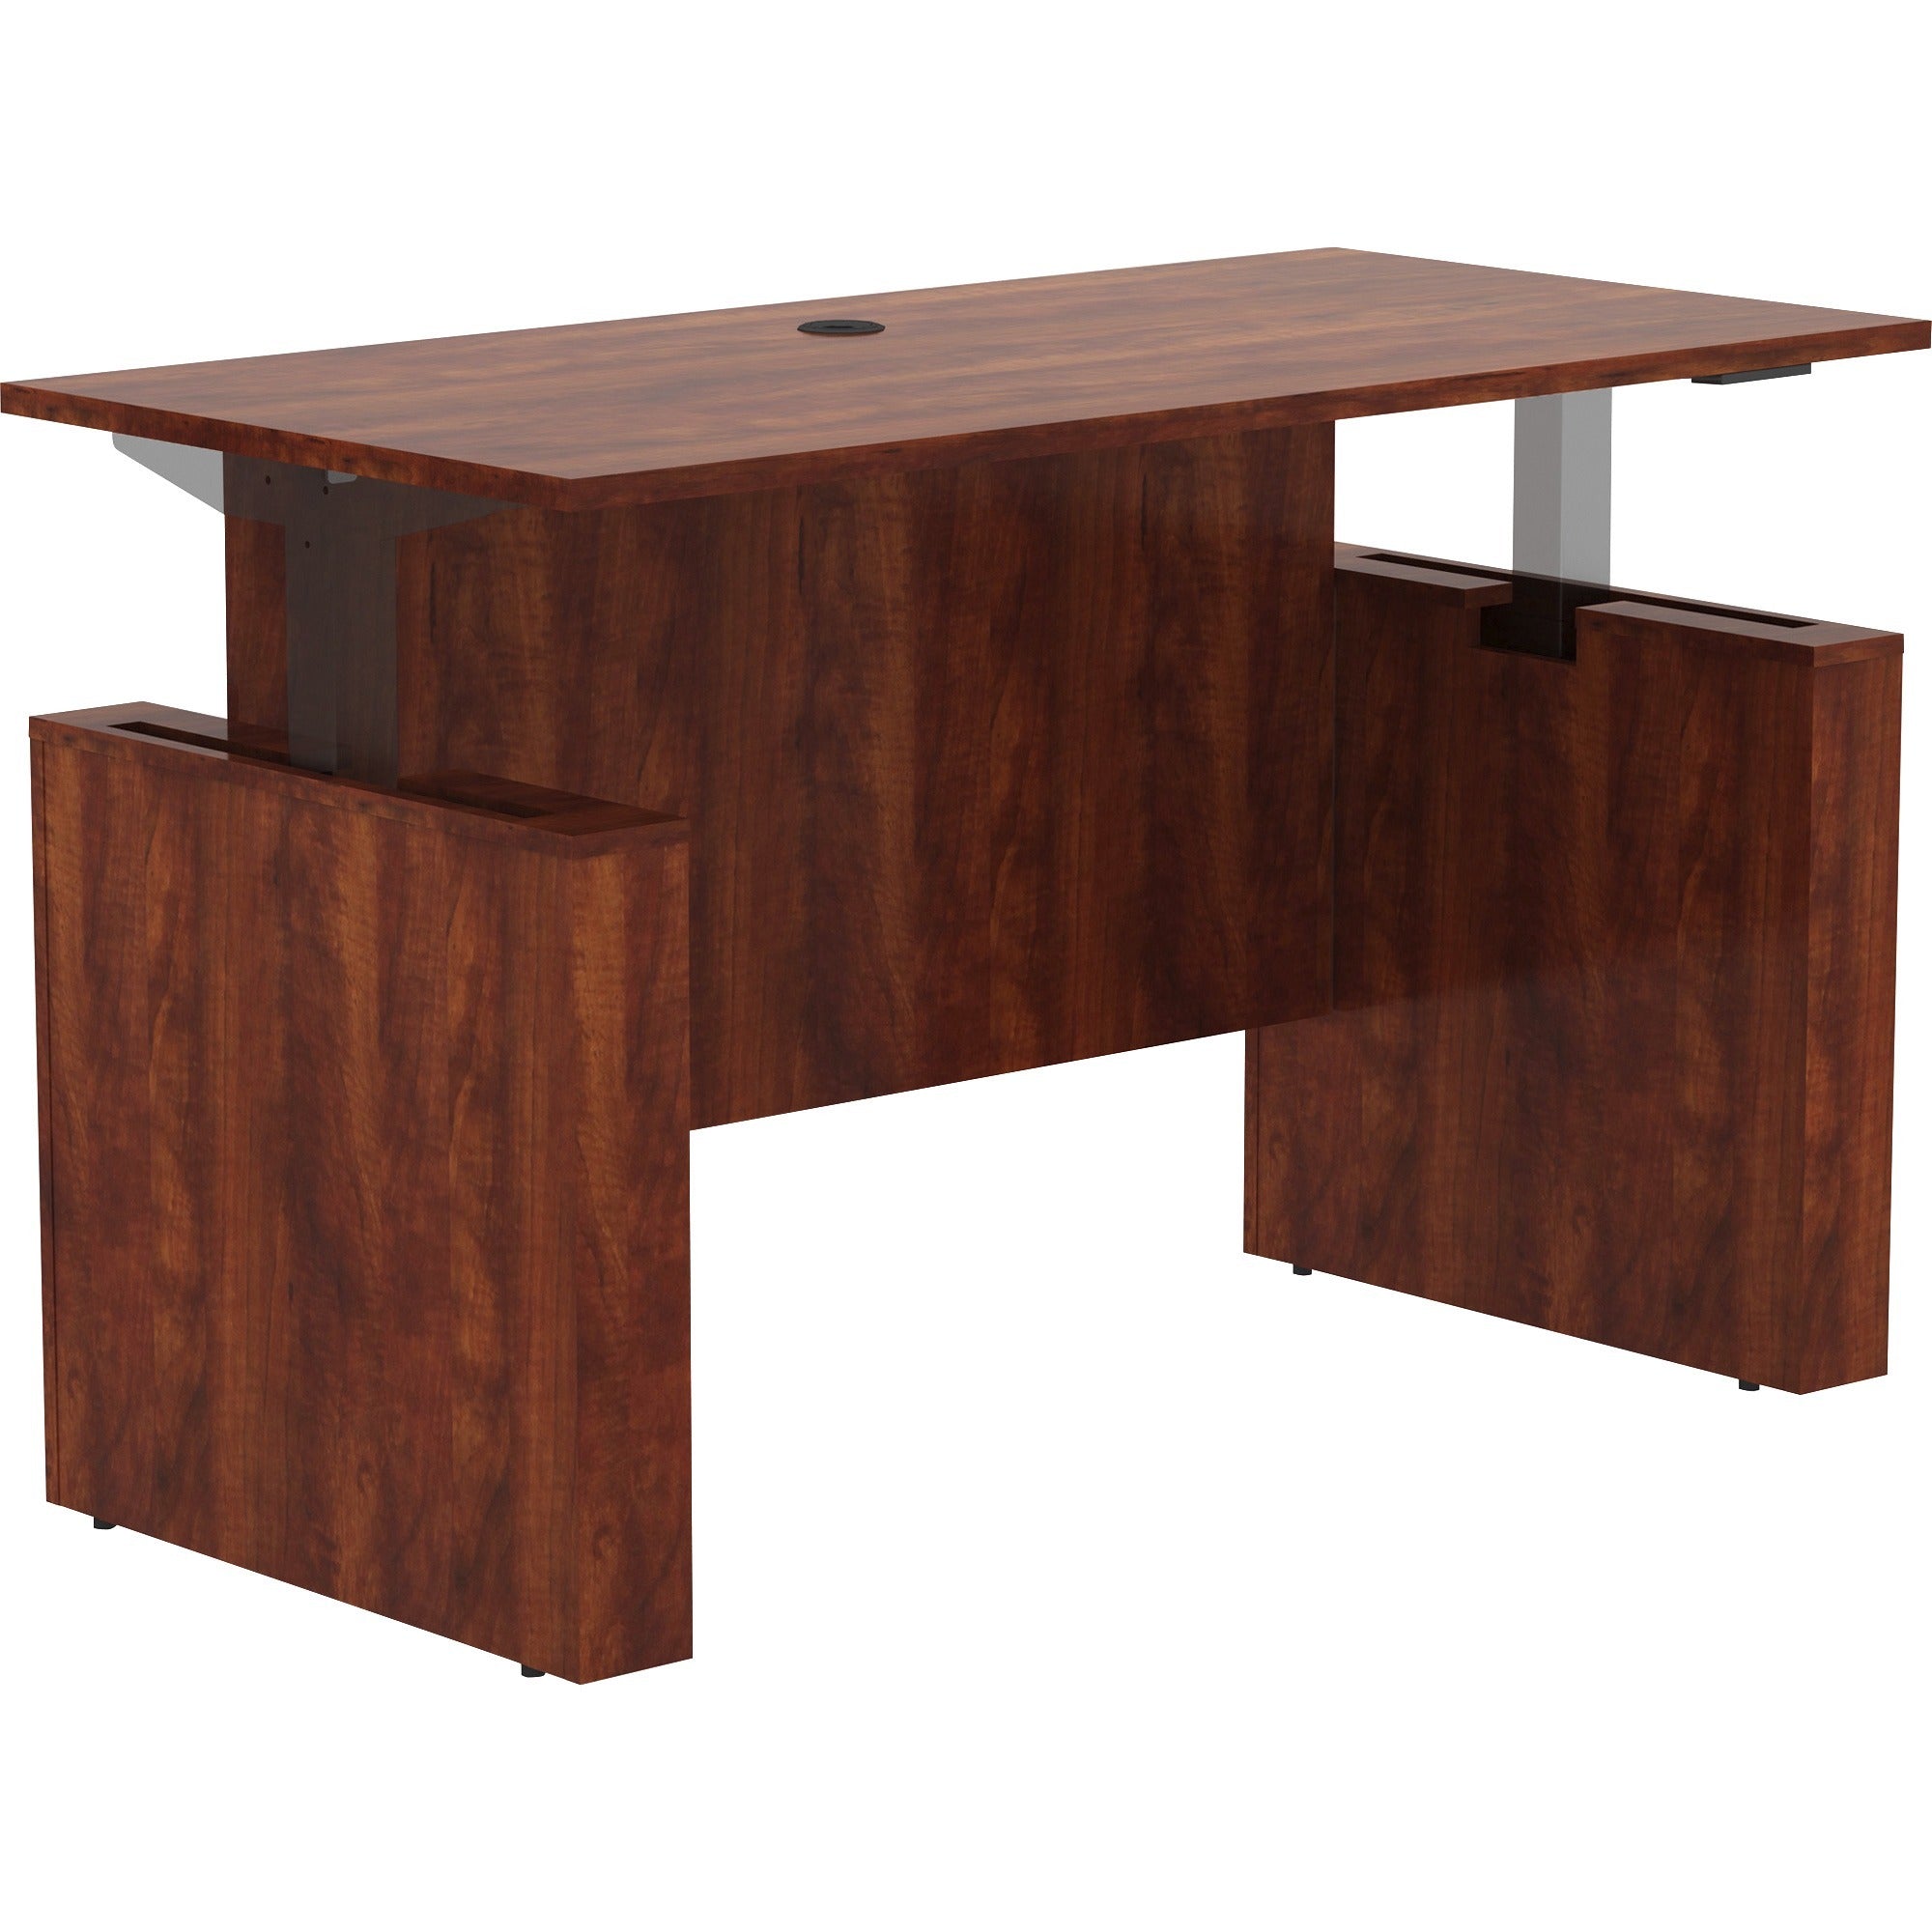 lorell-essentials-series-sit-to-stand-desk-shell-01-top-1-edge-60-x-2949-finish-cherry-laminate-table-top_llr69570 - 1